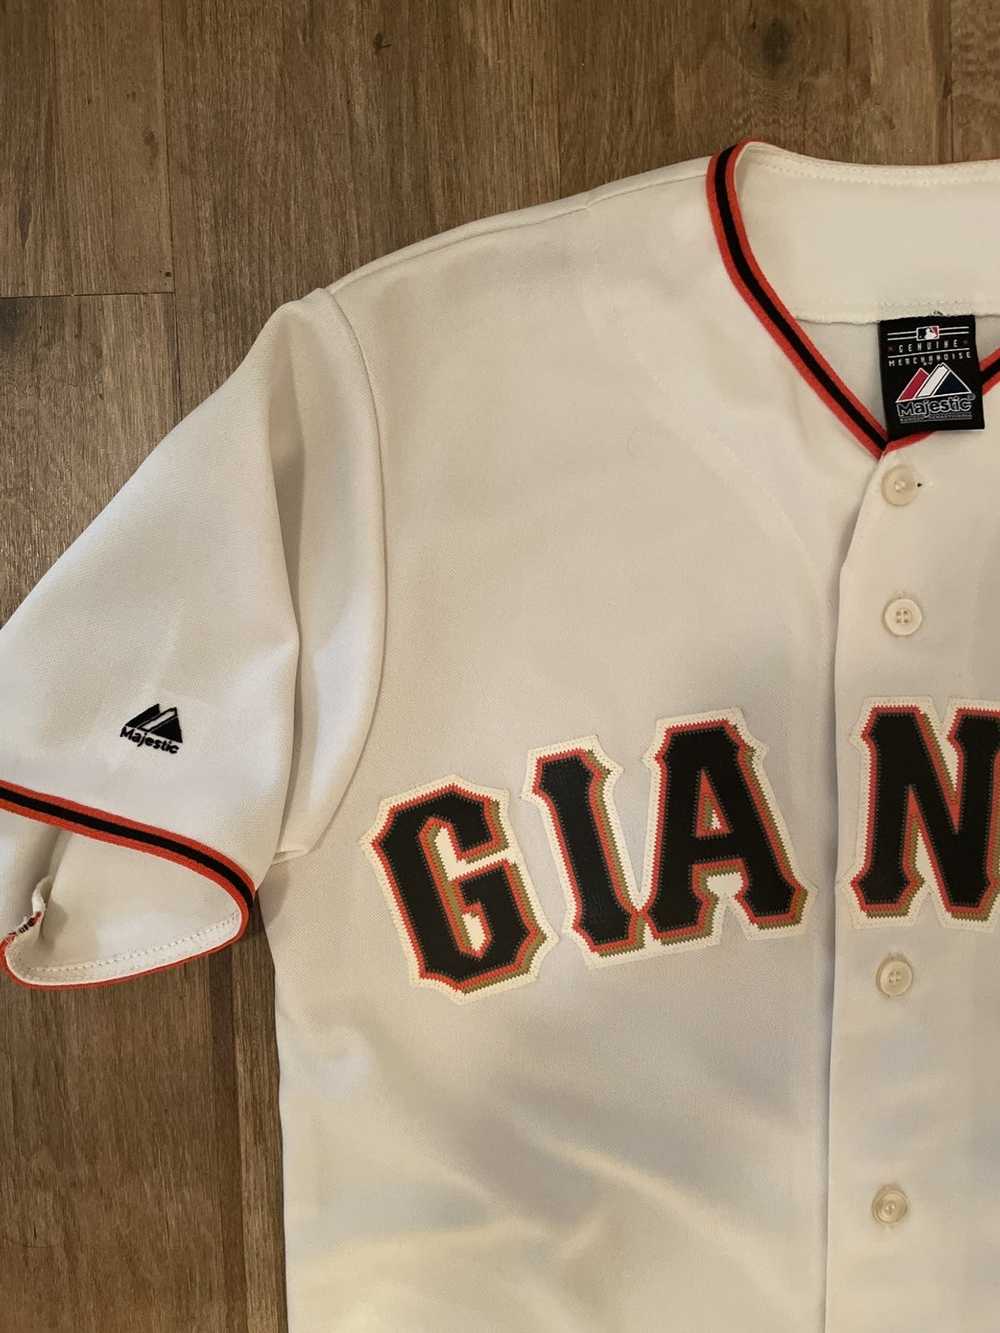 Authentic Majestic 52 2XL San Francisco Giants BUSTER POSEY COOL BASE JERSEY